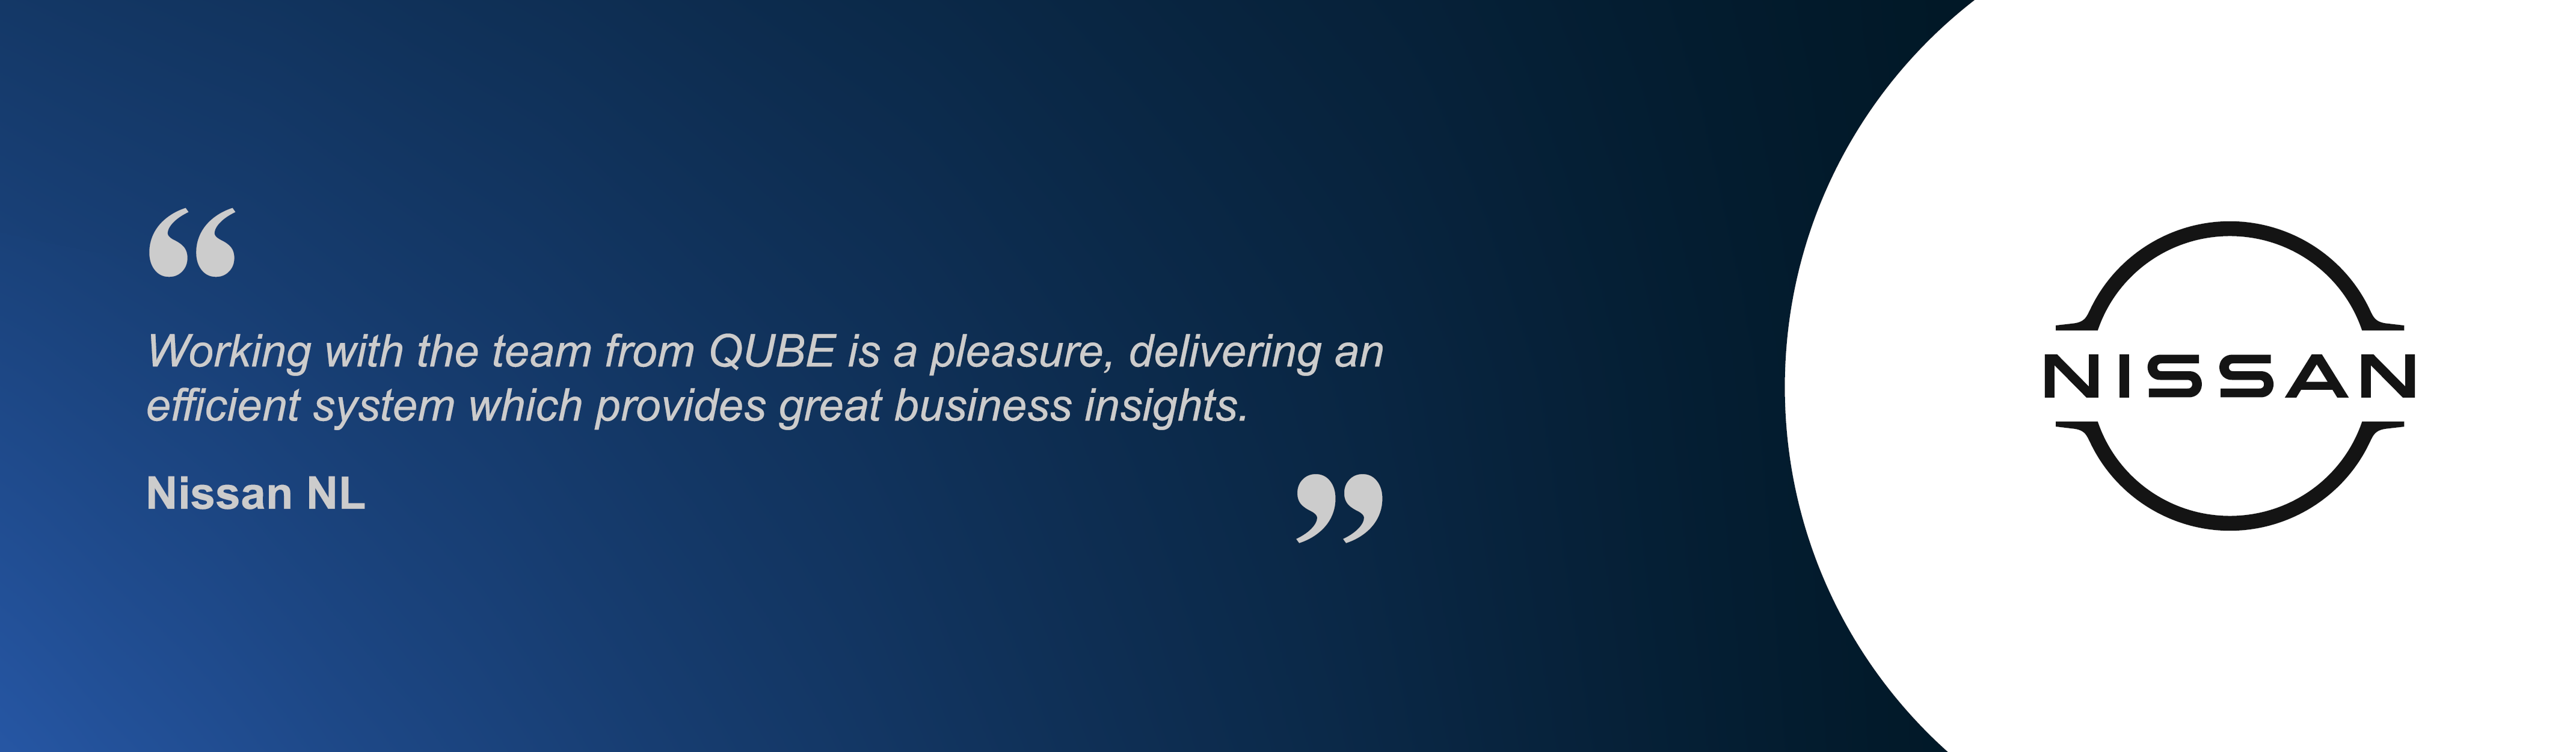 Feature image of client quote from Nissan NL (Netherlands)